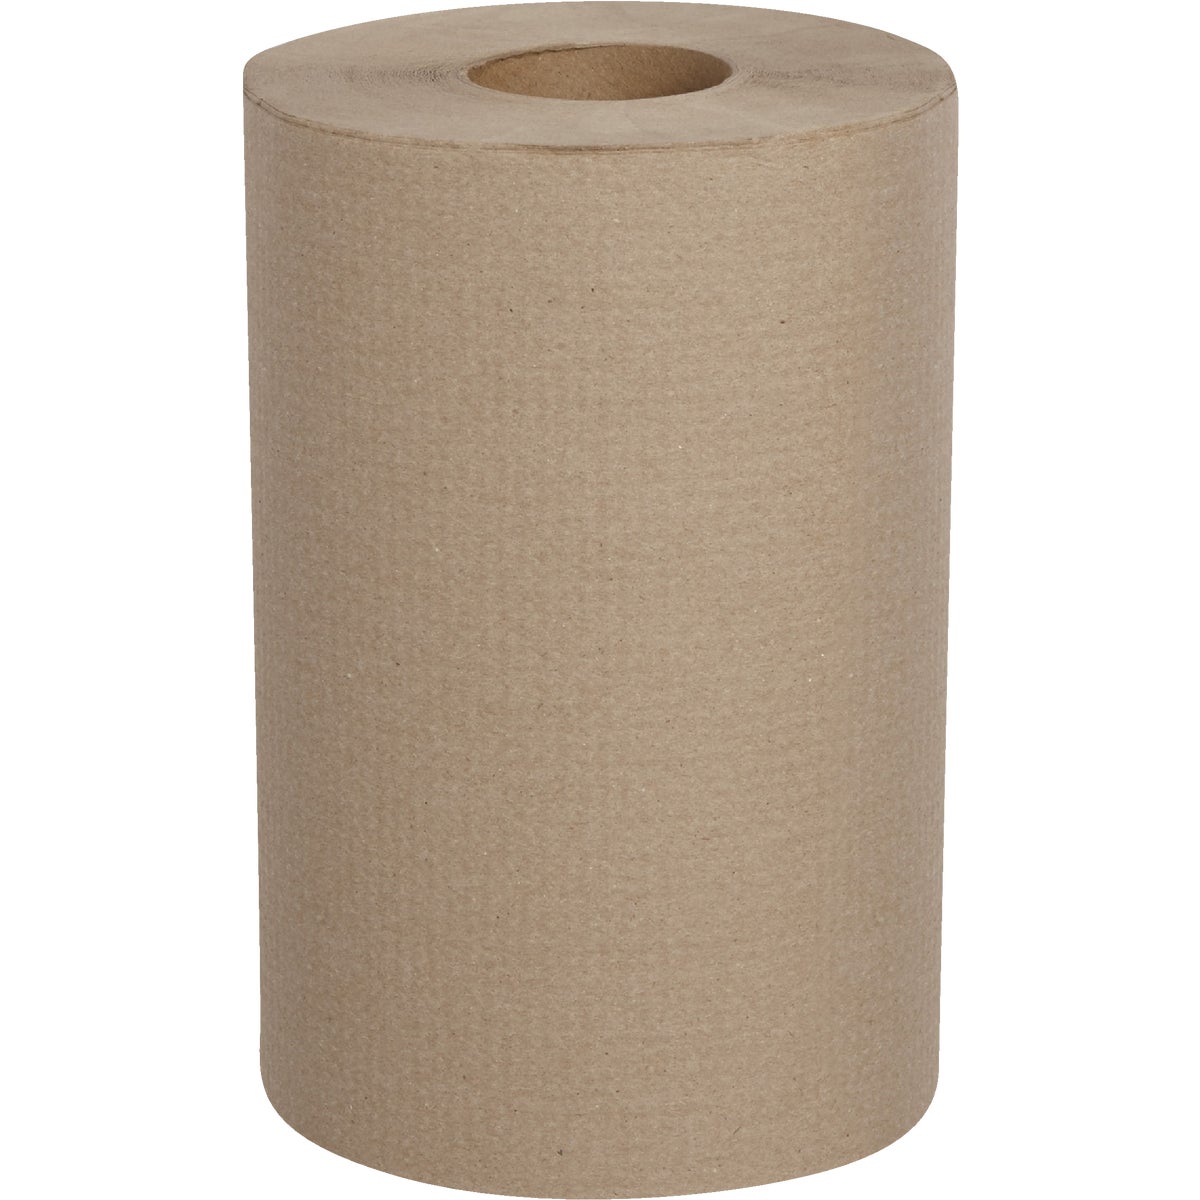 Item 631345, Hardwound 1-ply roll paper towels without perforations.